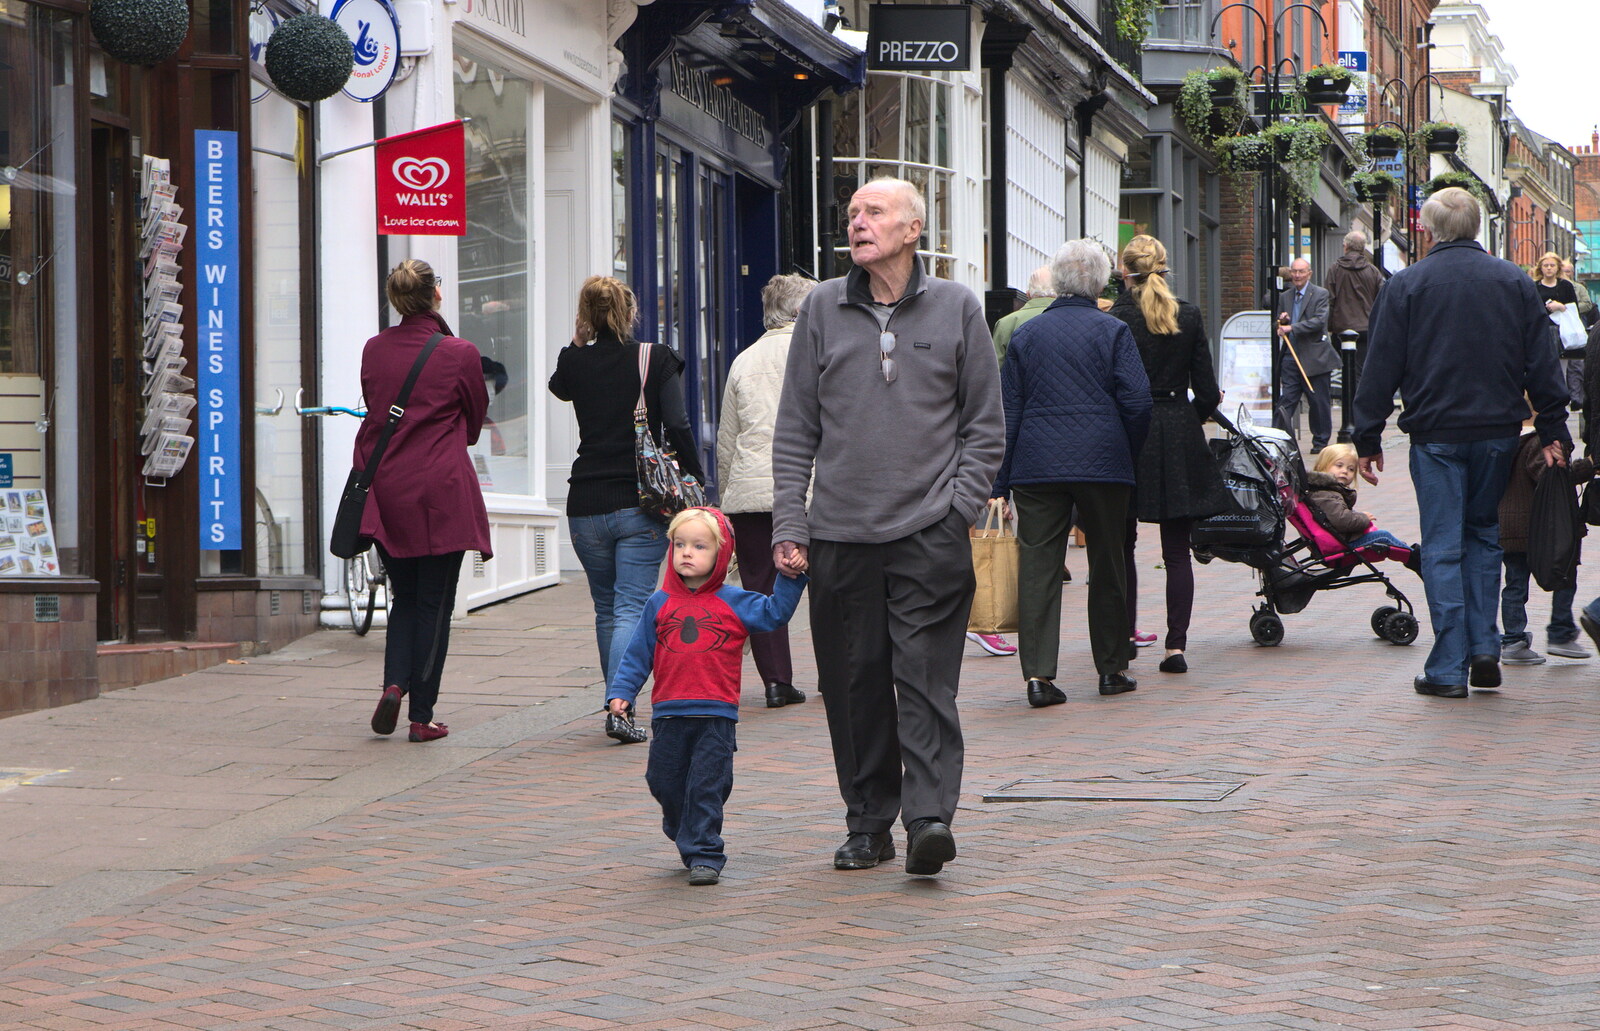 Harry and Grandad near Prezzo Pizza from A Trip to Abbey Gardens, Bury St. Edmunds, Suffolk - 29th October 2014